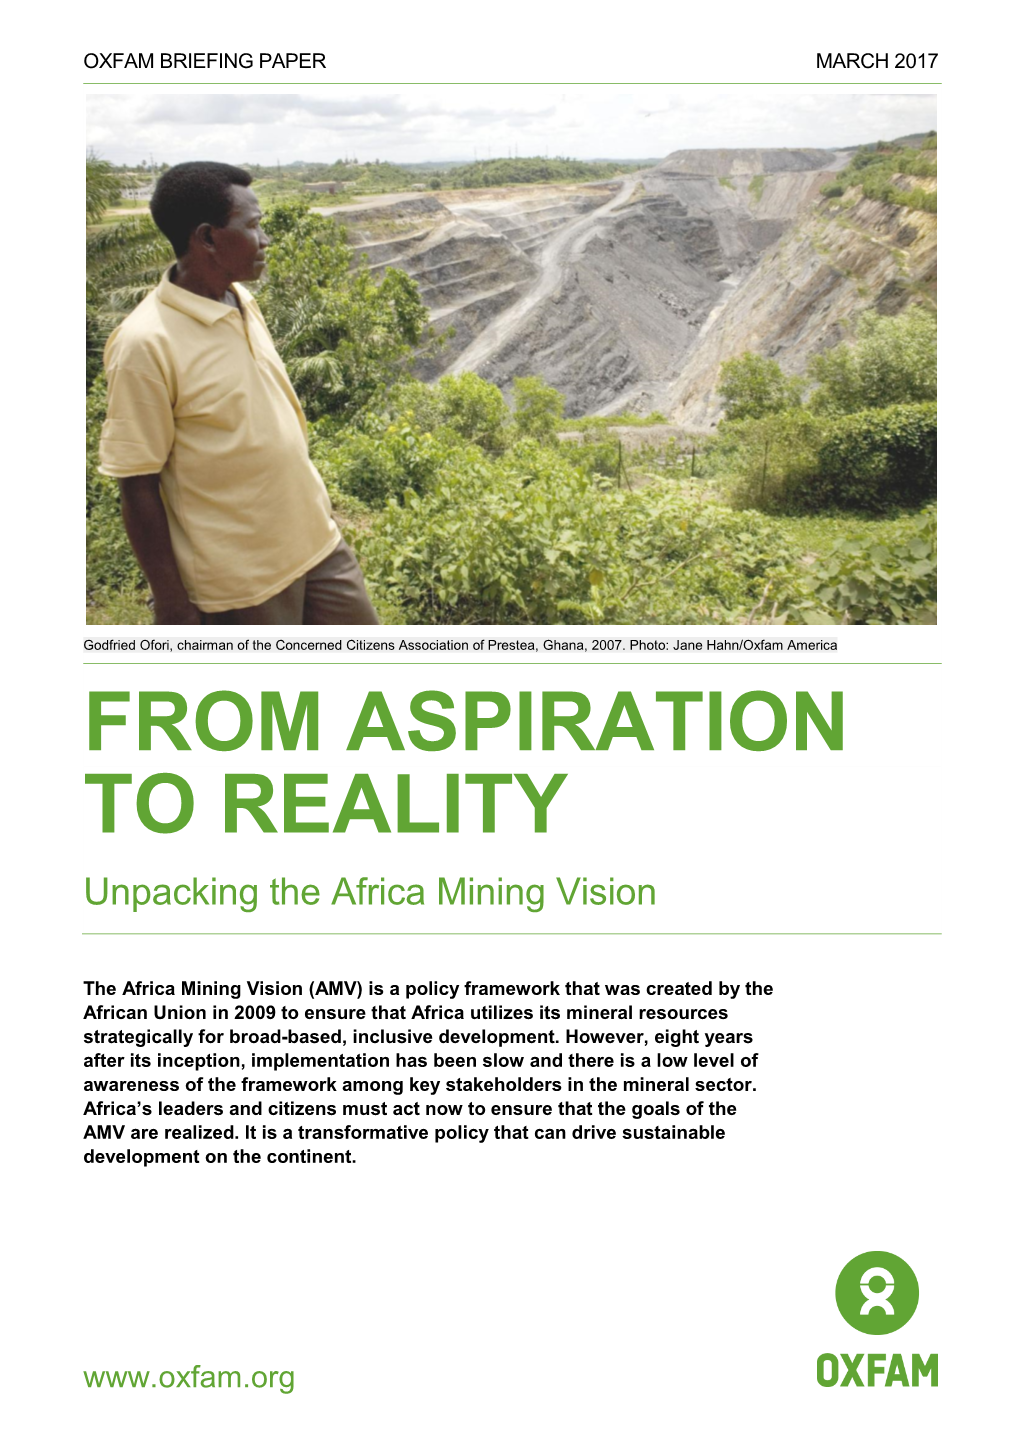 From Aspiration to Reality: Unpacking the Africa Mining Vision